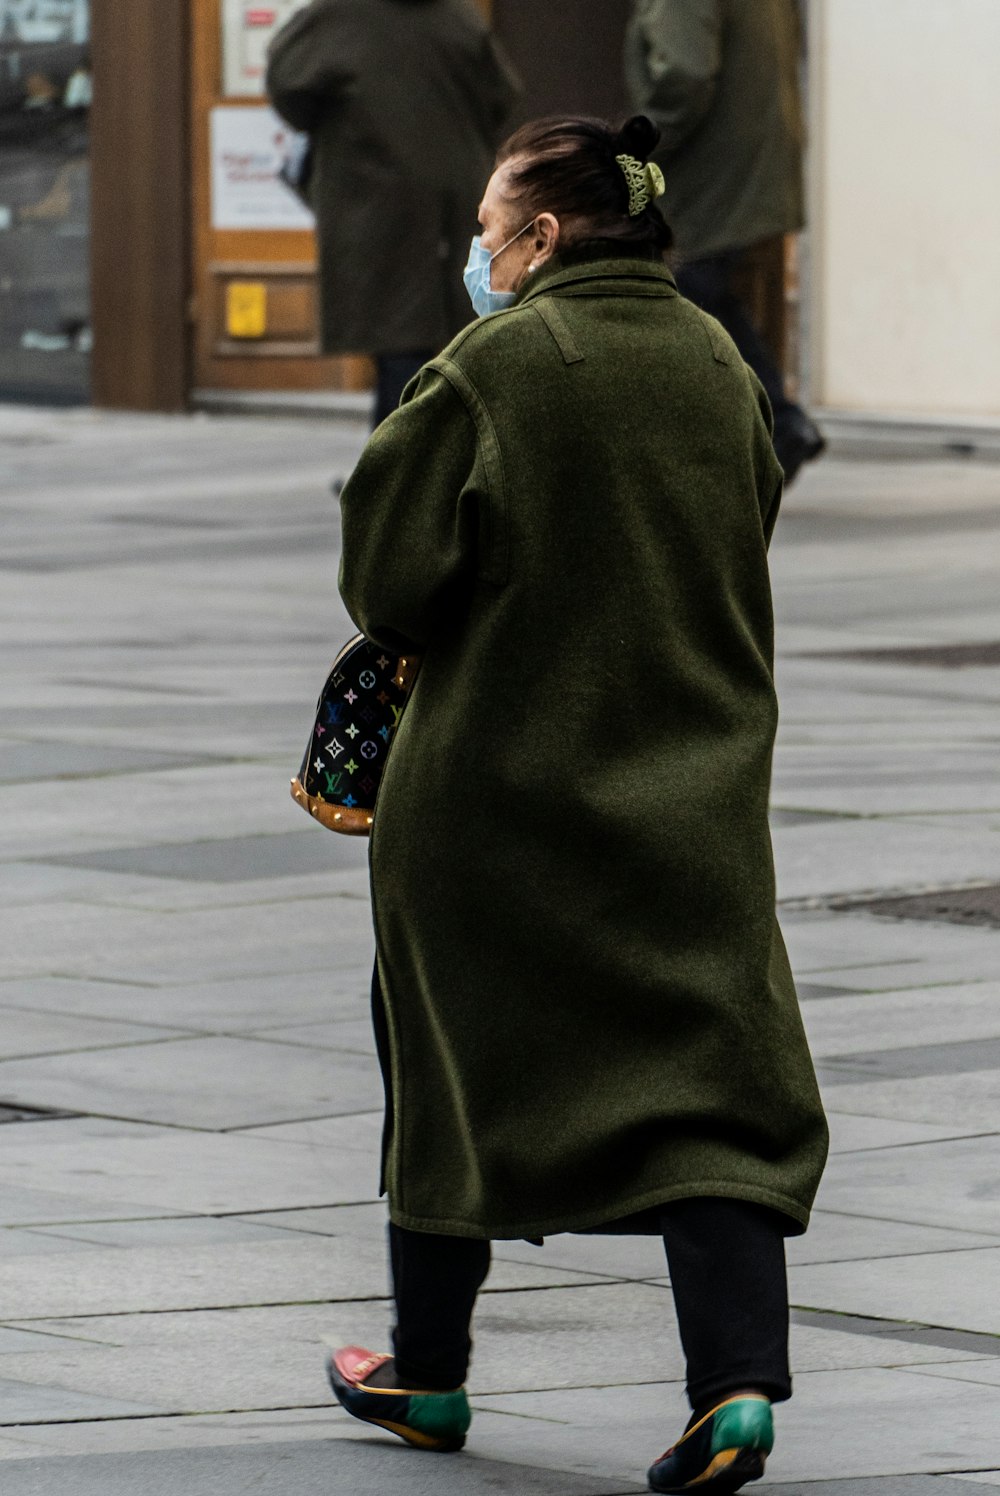 person in green coat walking on street during daytime